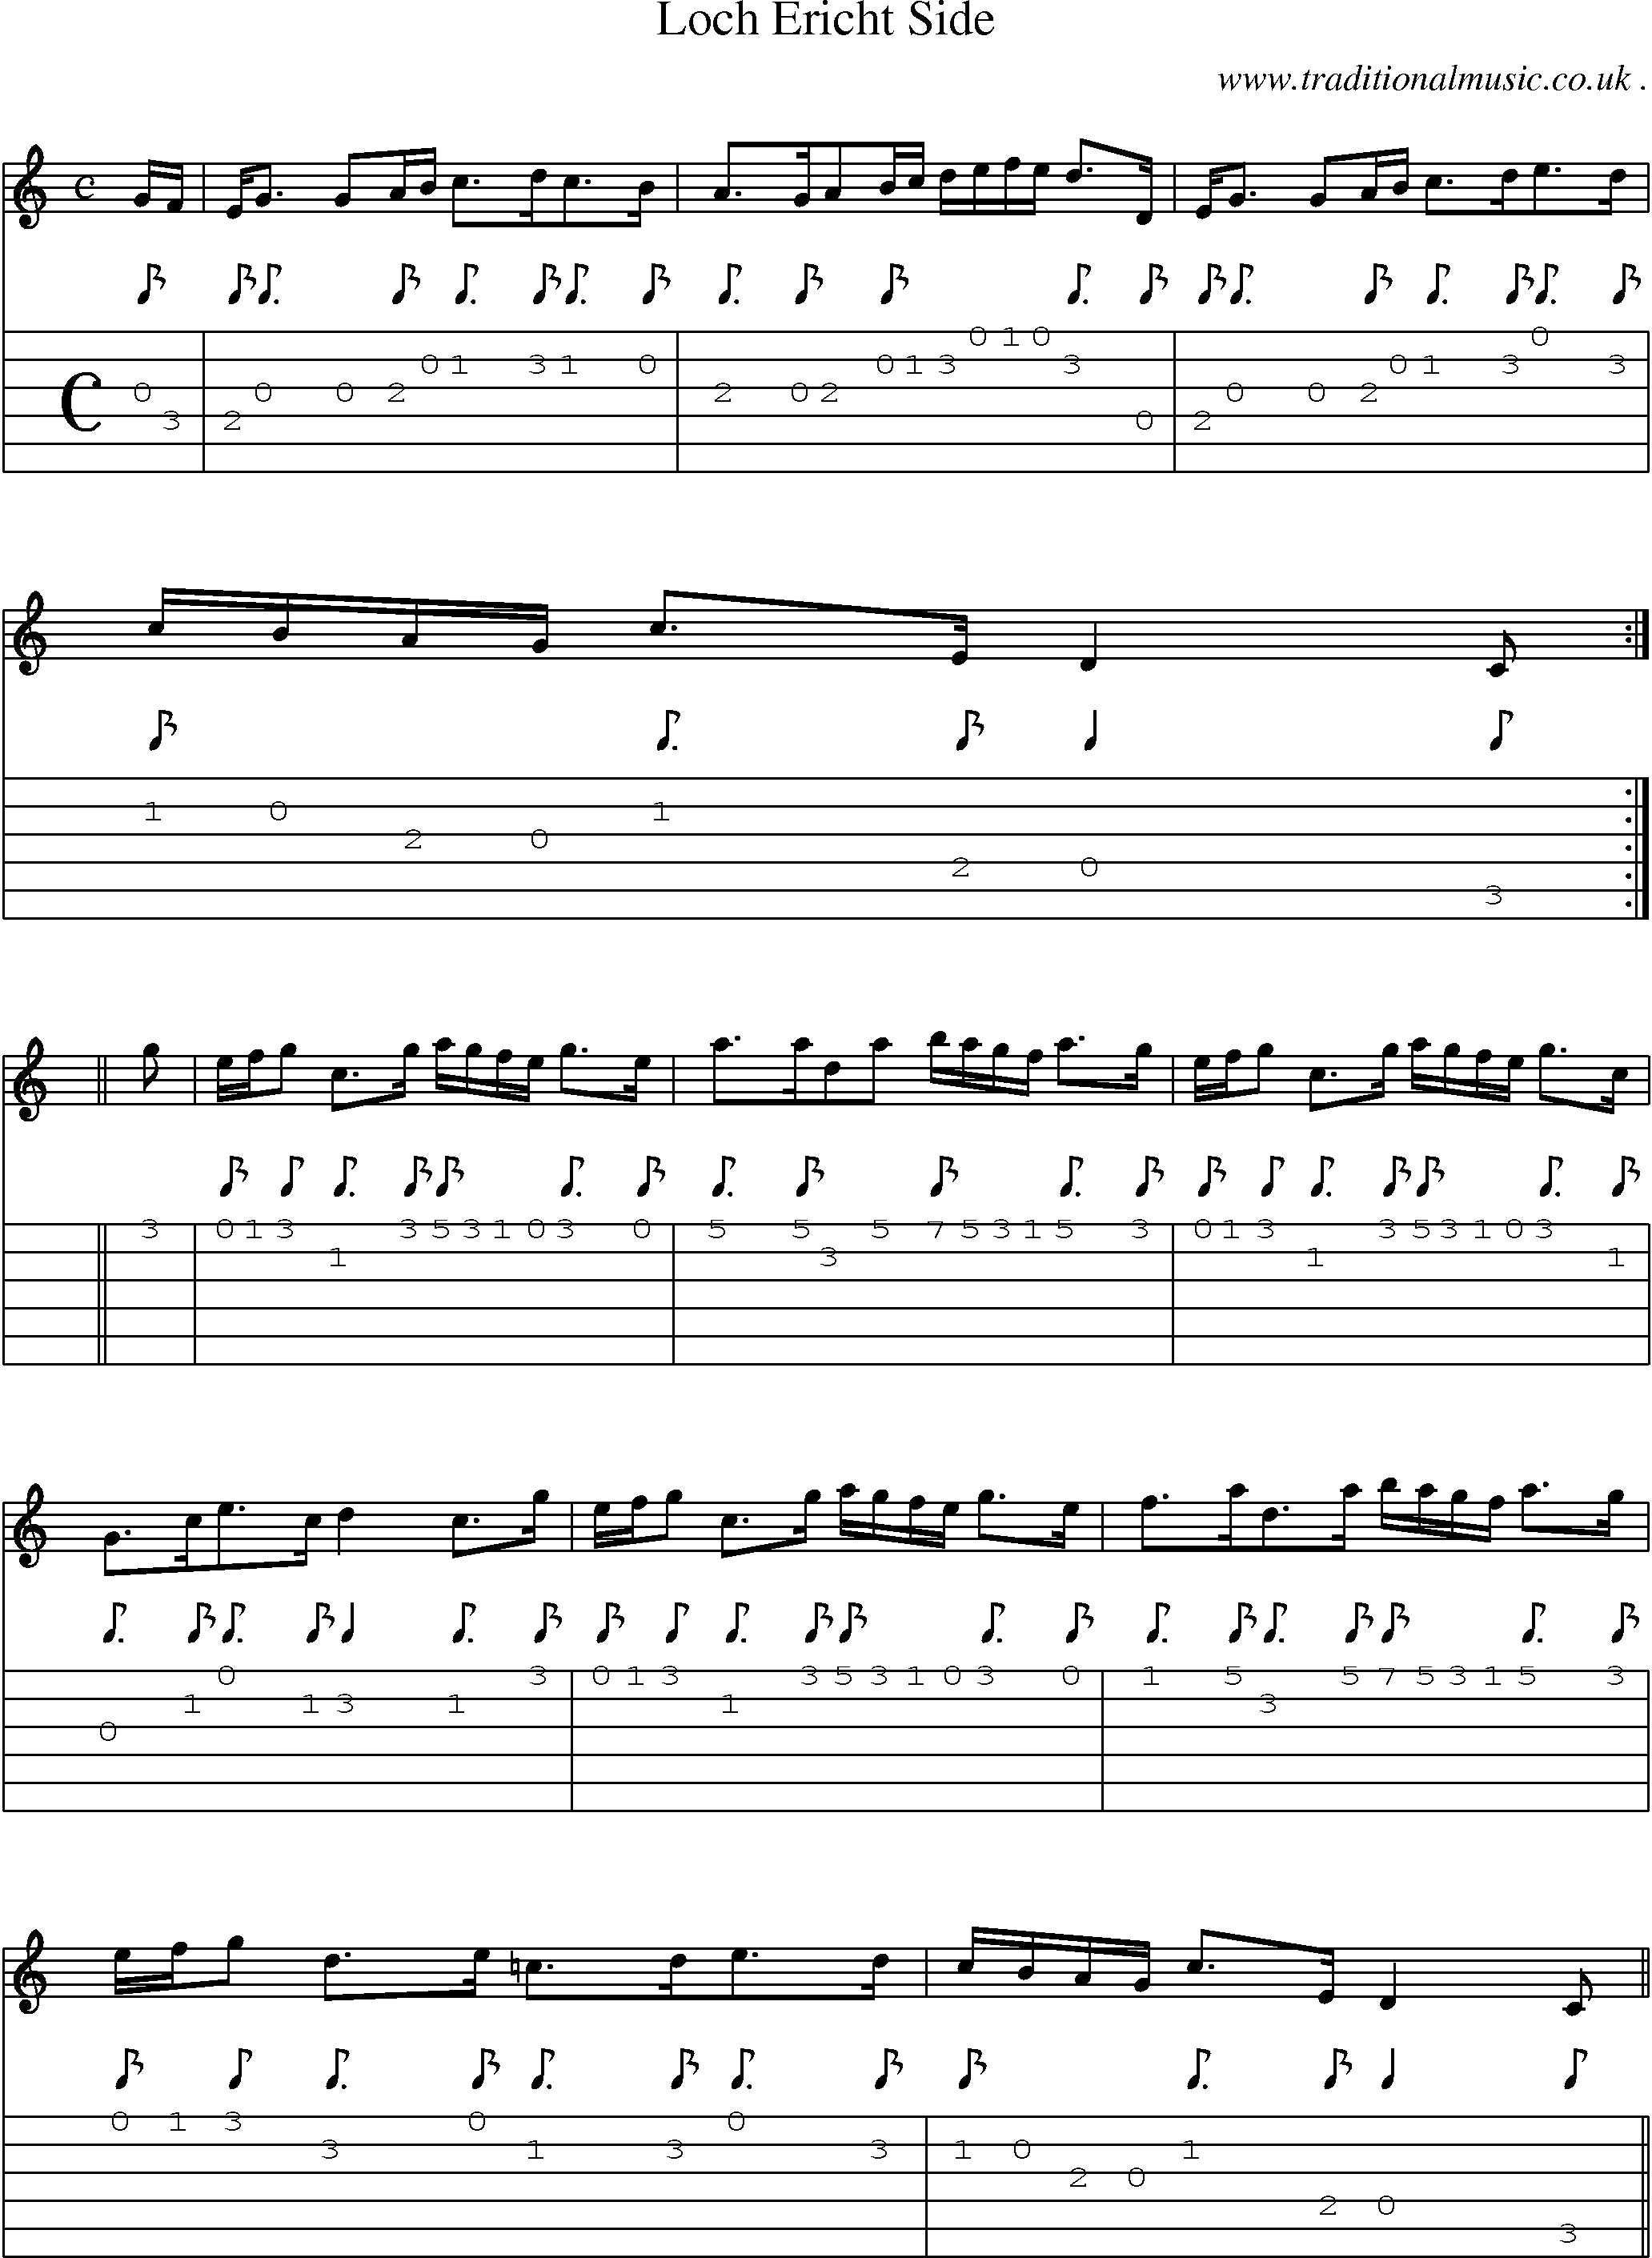 Sheet-music  score, Chords and Guitar Tabs for Loch Ericht Side